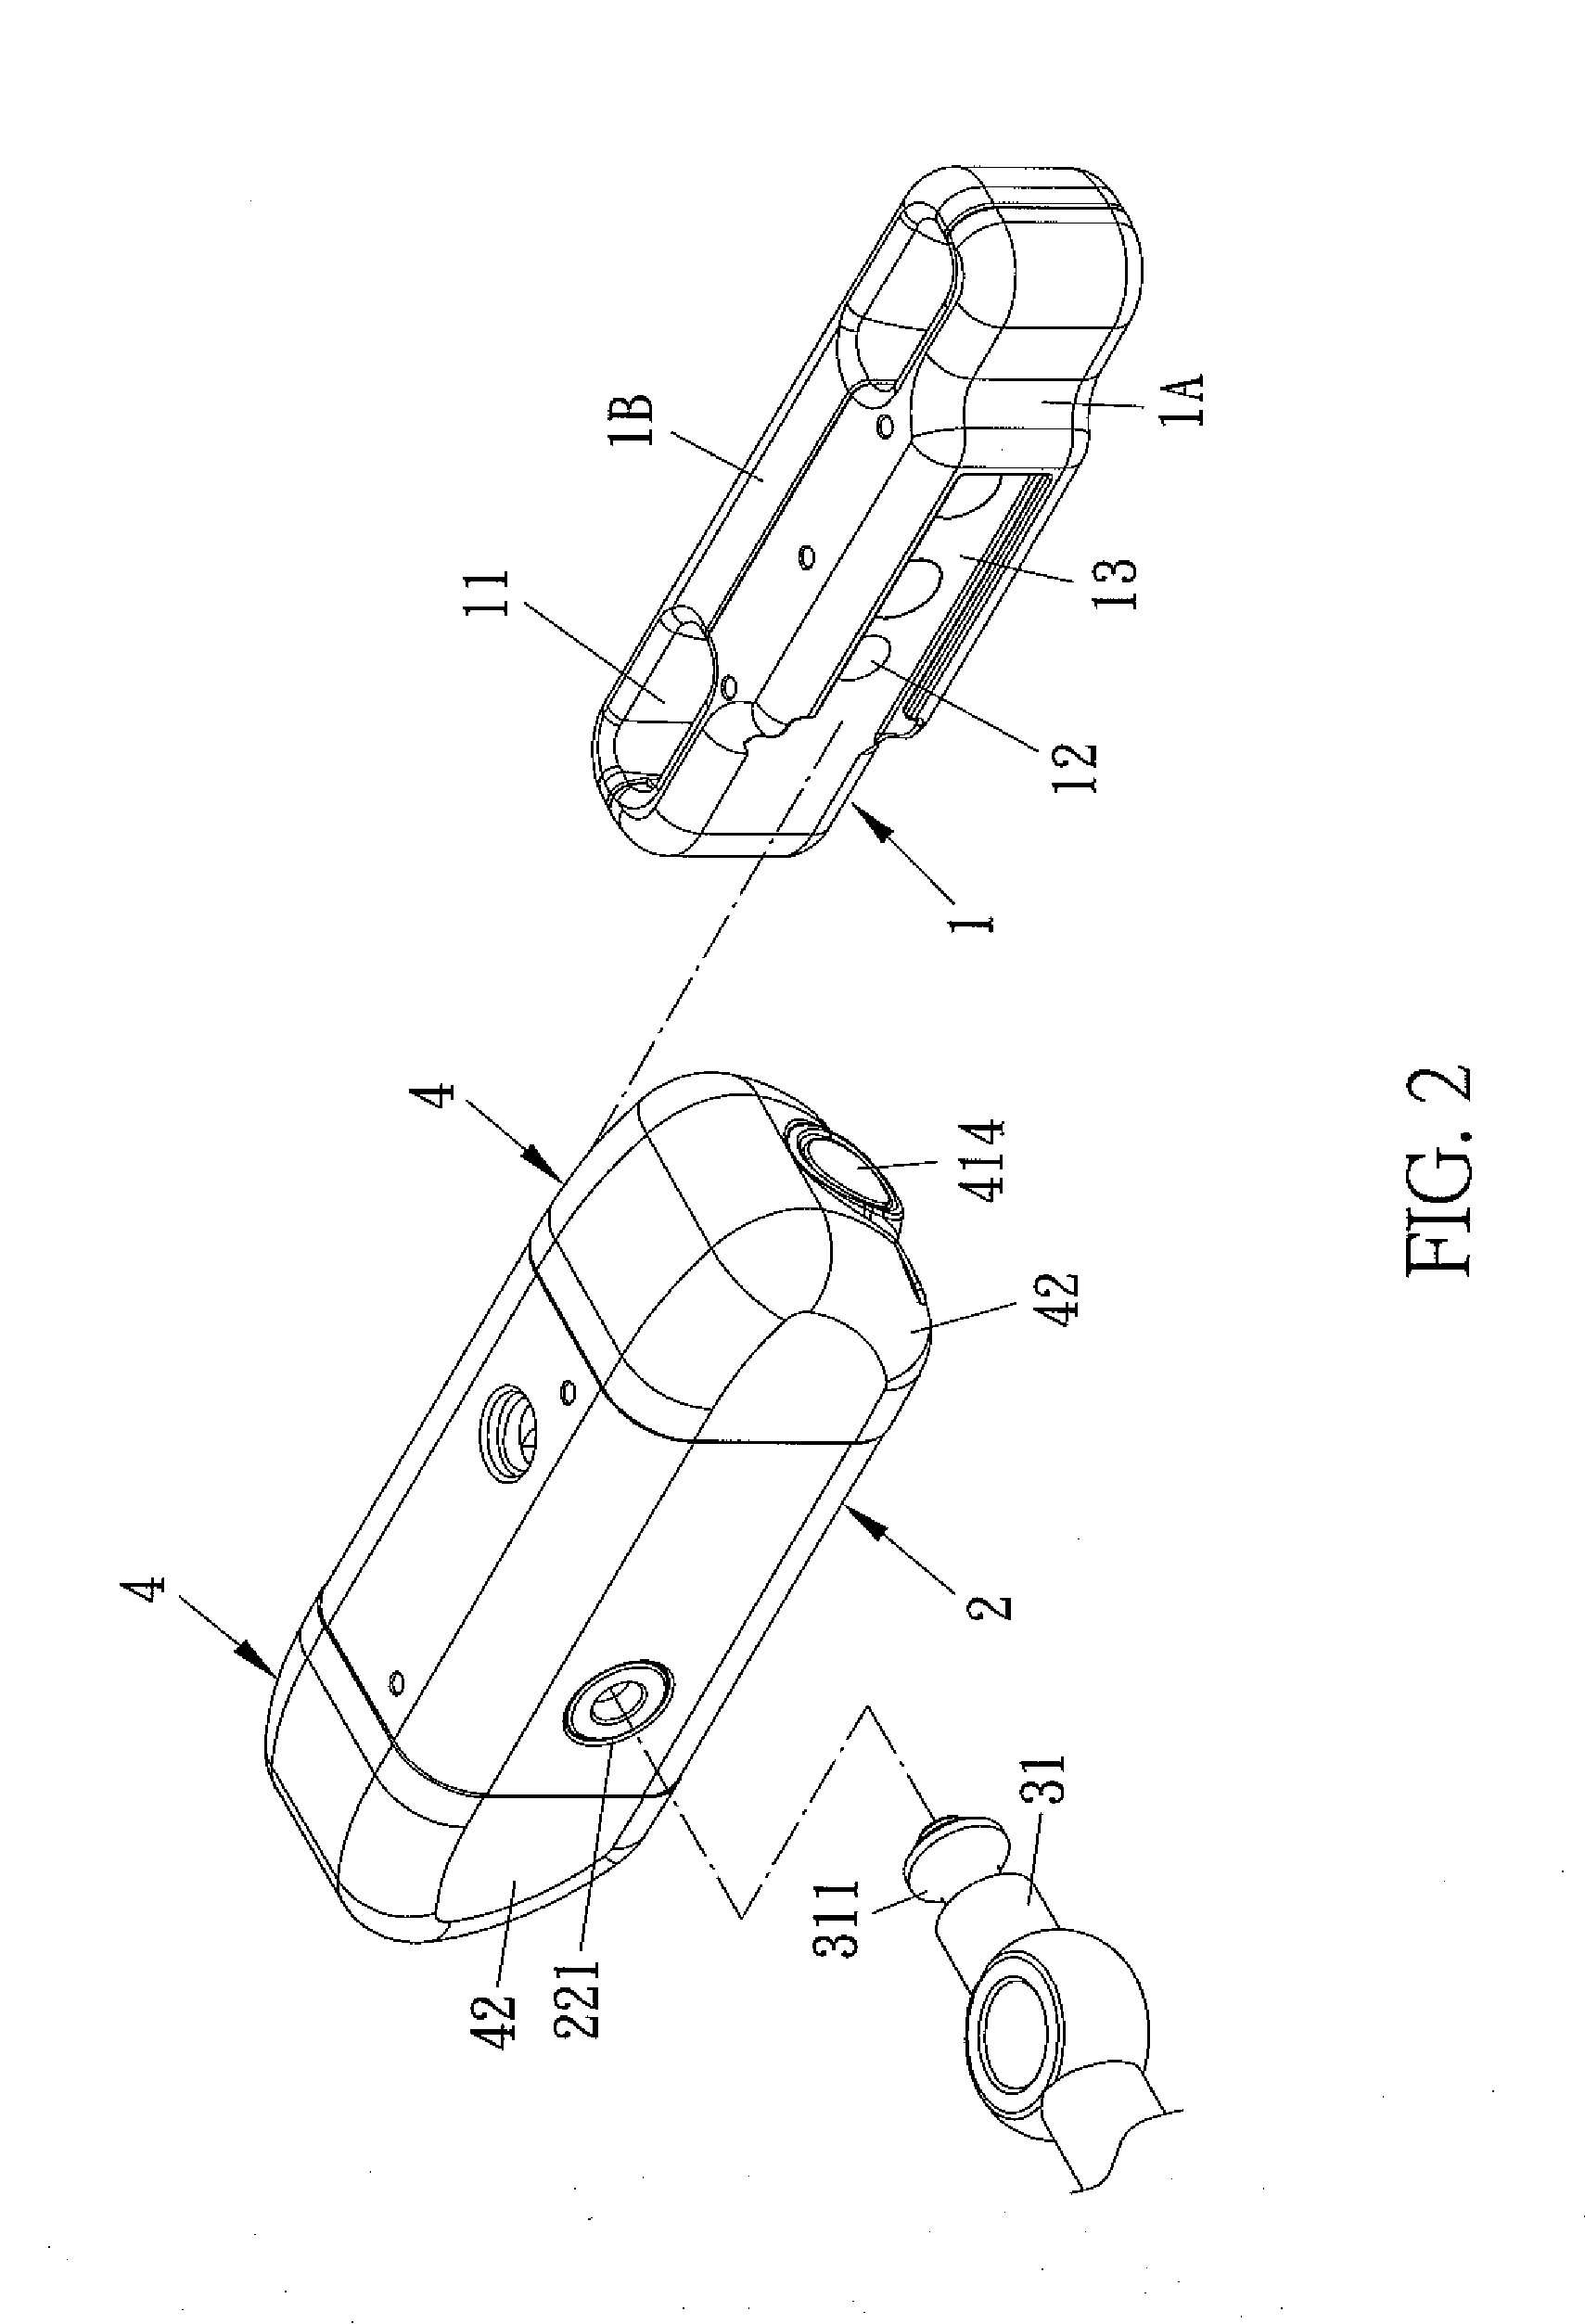 Locking Structure for a Bicycle